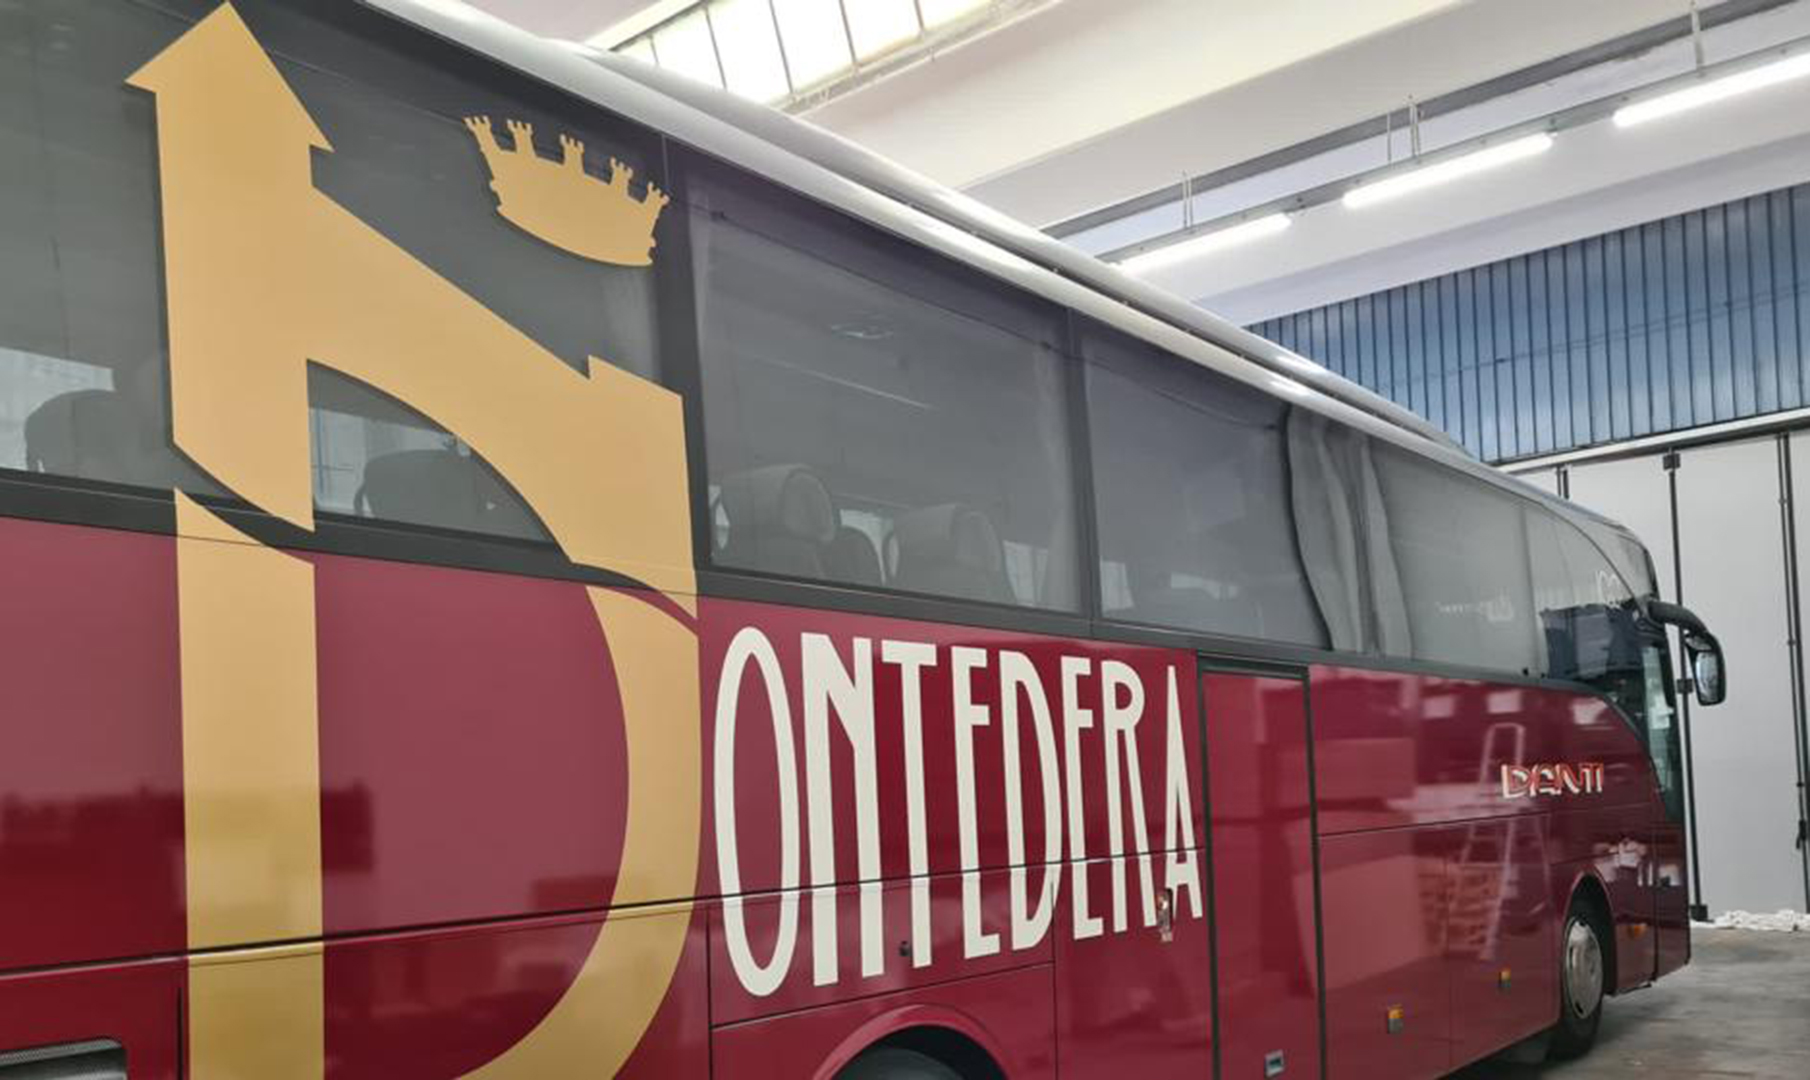 Total dressing of a bus for the Pontedera football team (Italy) thanks to a specific 3D film.